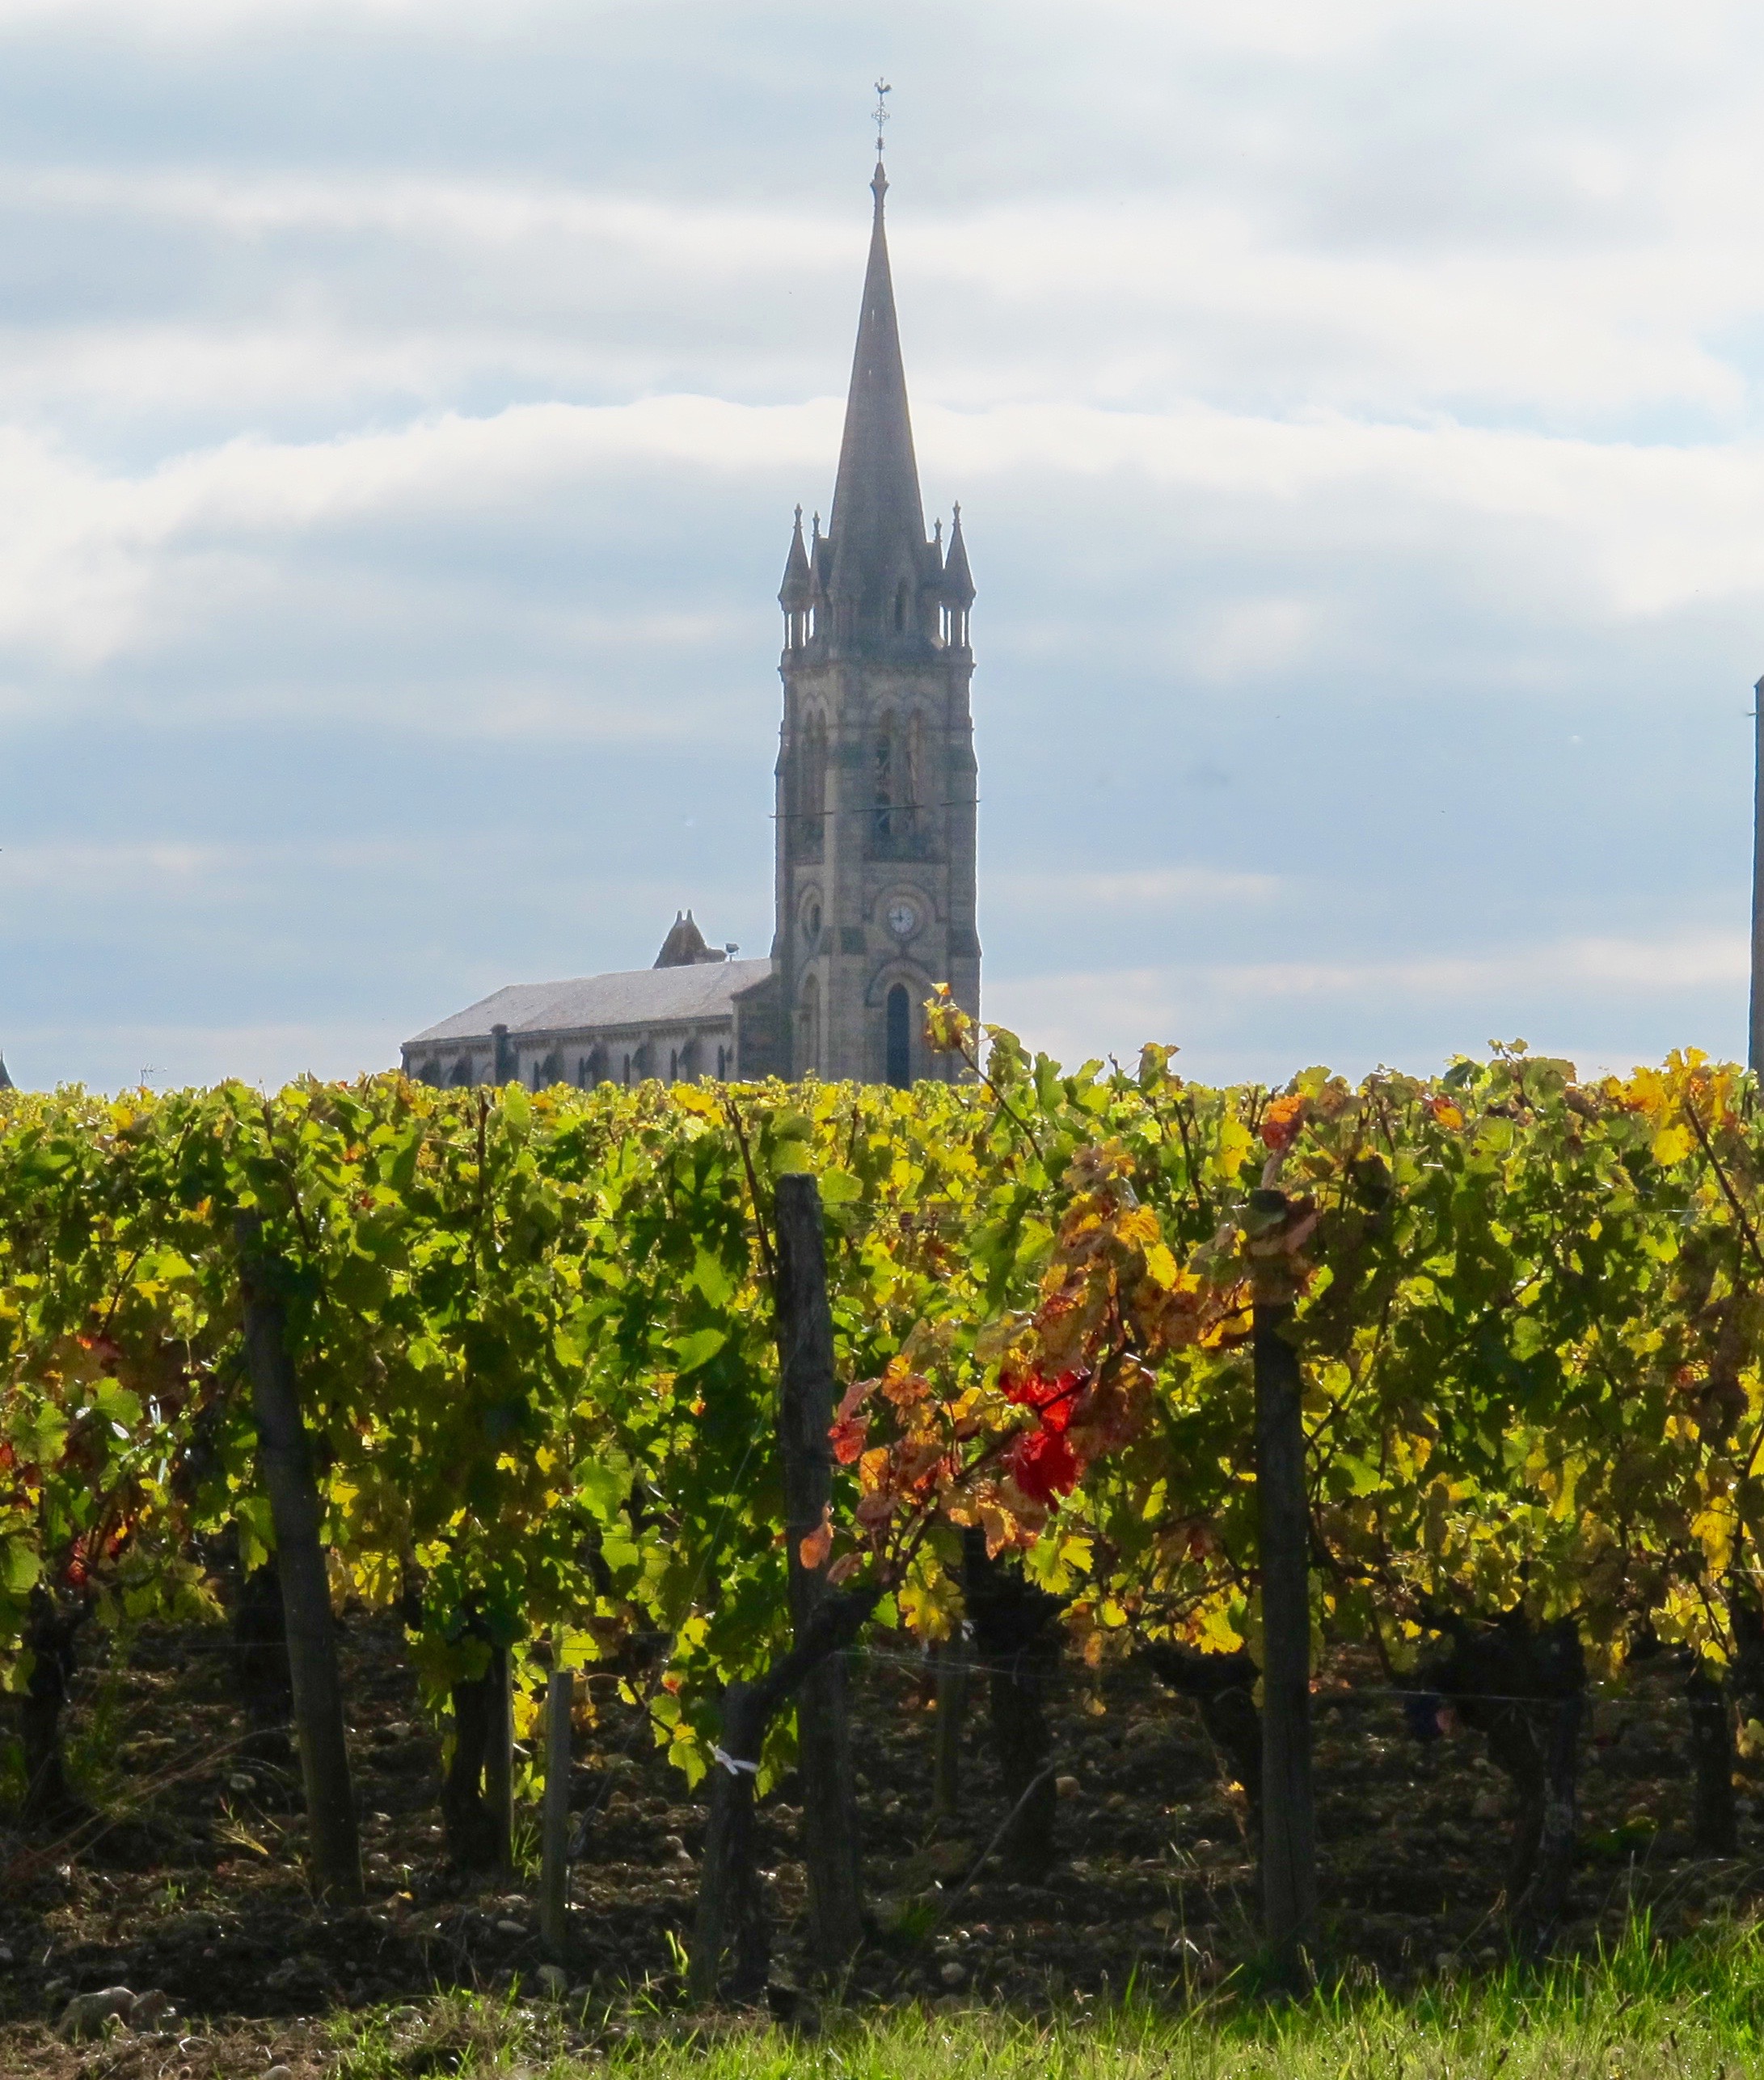 L'Eglise of Pomerol - an ancient landmark and namesake for several local wineries. Photo by Marla Norman.